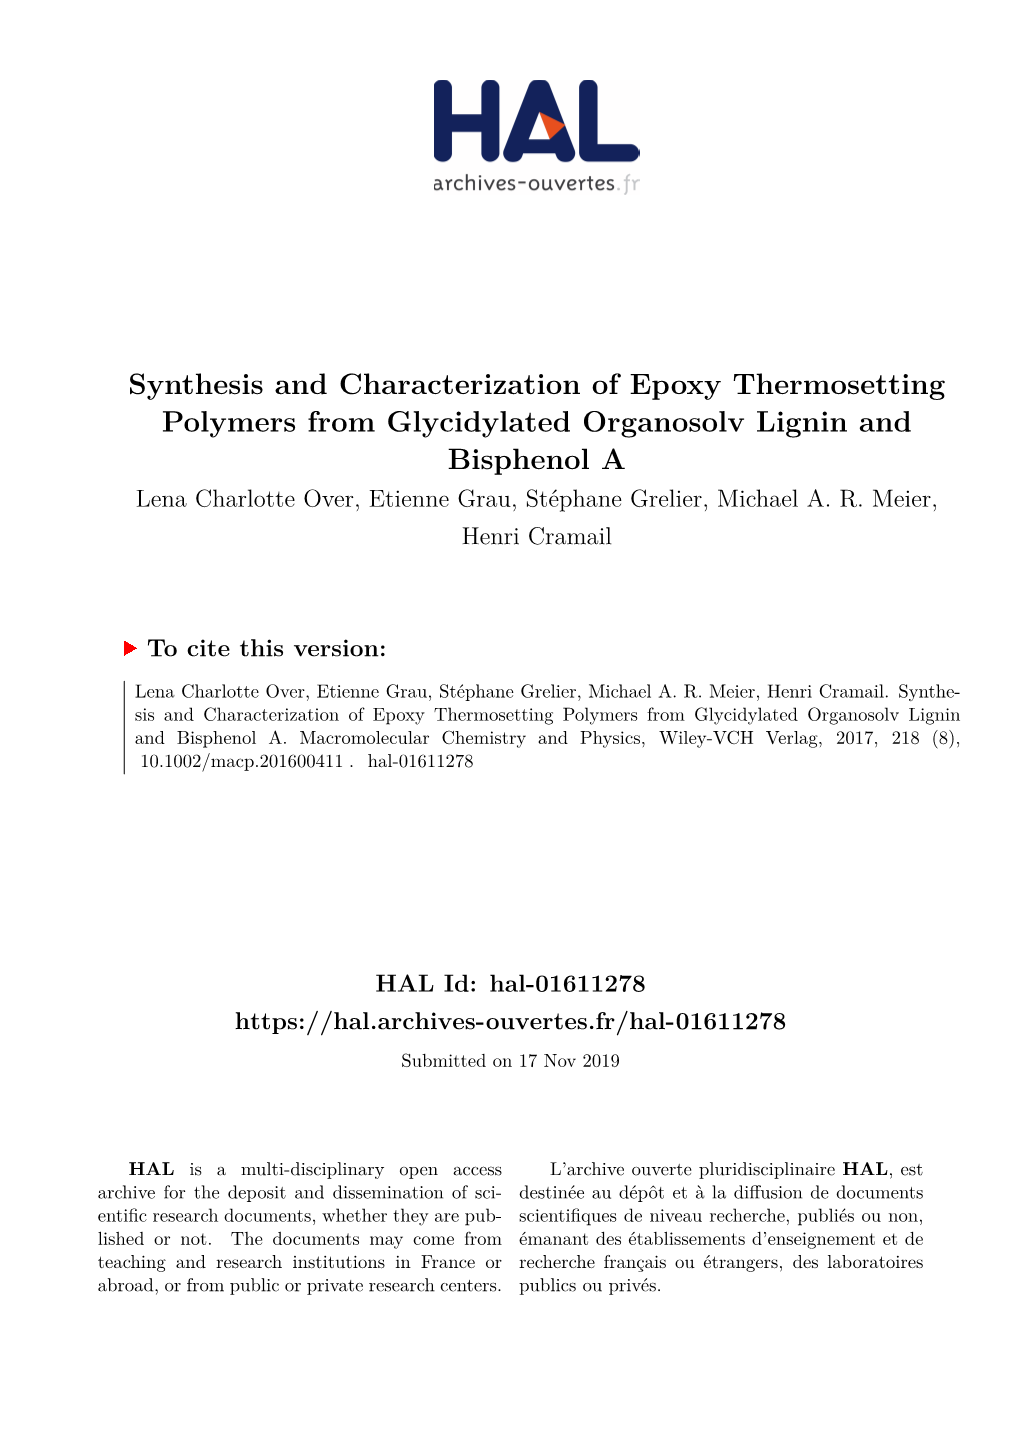 Synthesis and Characterization of Epoxy Thermosetting Polymers